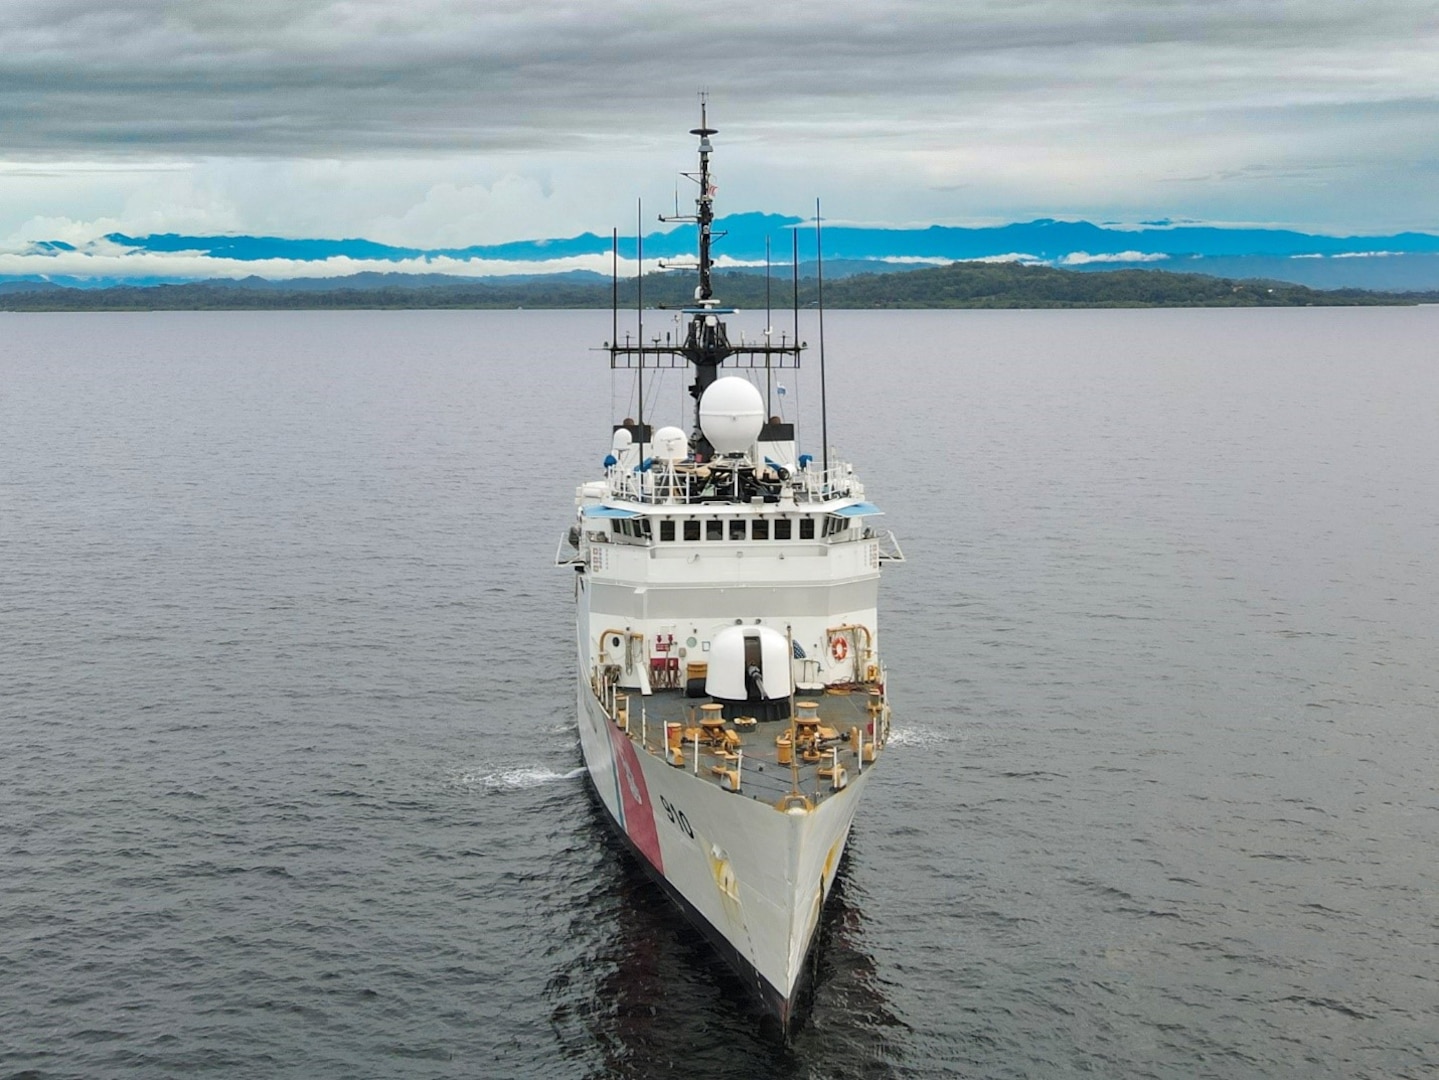 U.S. Coast Guard Cutter Thetis (WMEC 910) is anchored outside of Bocas del Toro, Panama during a port of call, Aug. 8, 2023. Thetis patrolled the Eastern Pacific Ocean and Western Caribbean Sea in support of the Coast Guard’s mission to combat illegal drug trafficking. (U.S. Coast Guard photo by Ensign Jordan Russell)